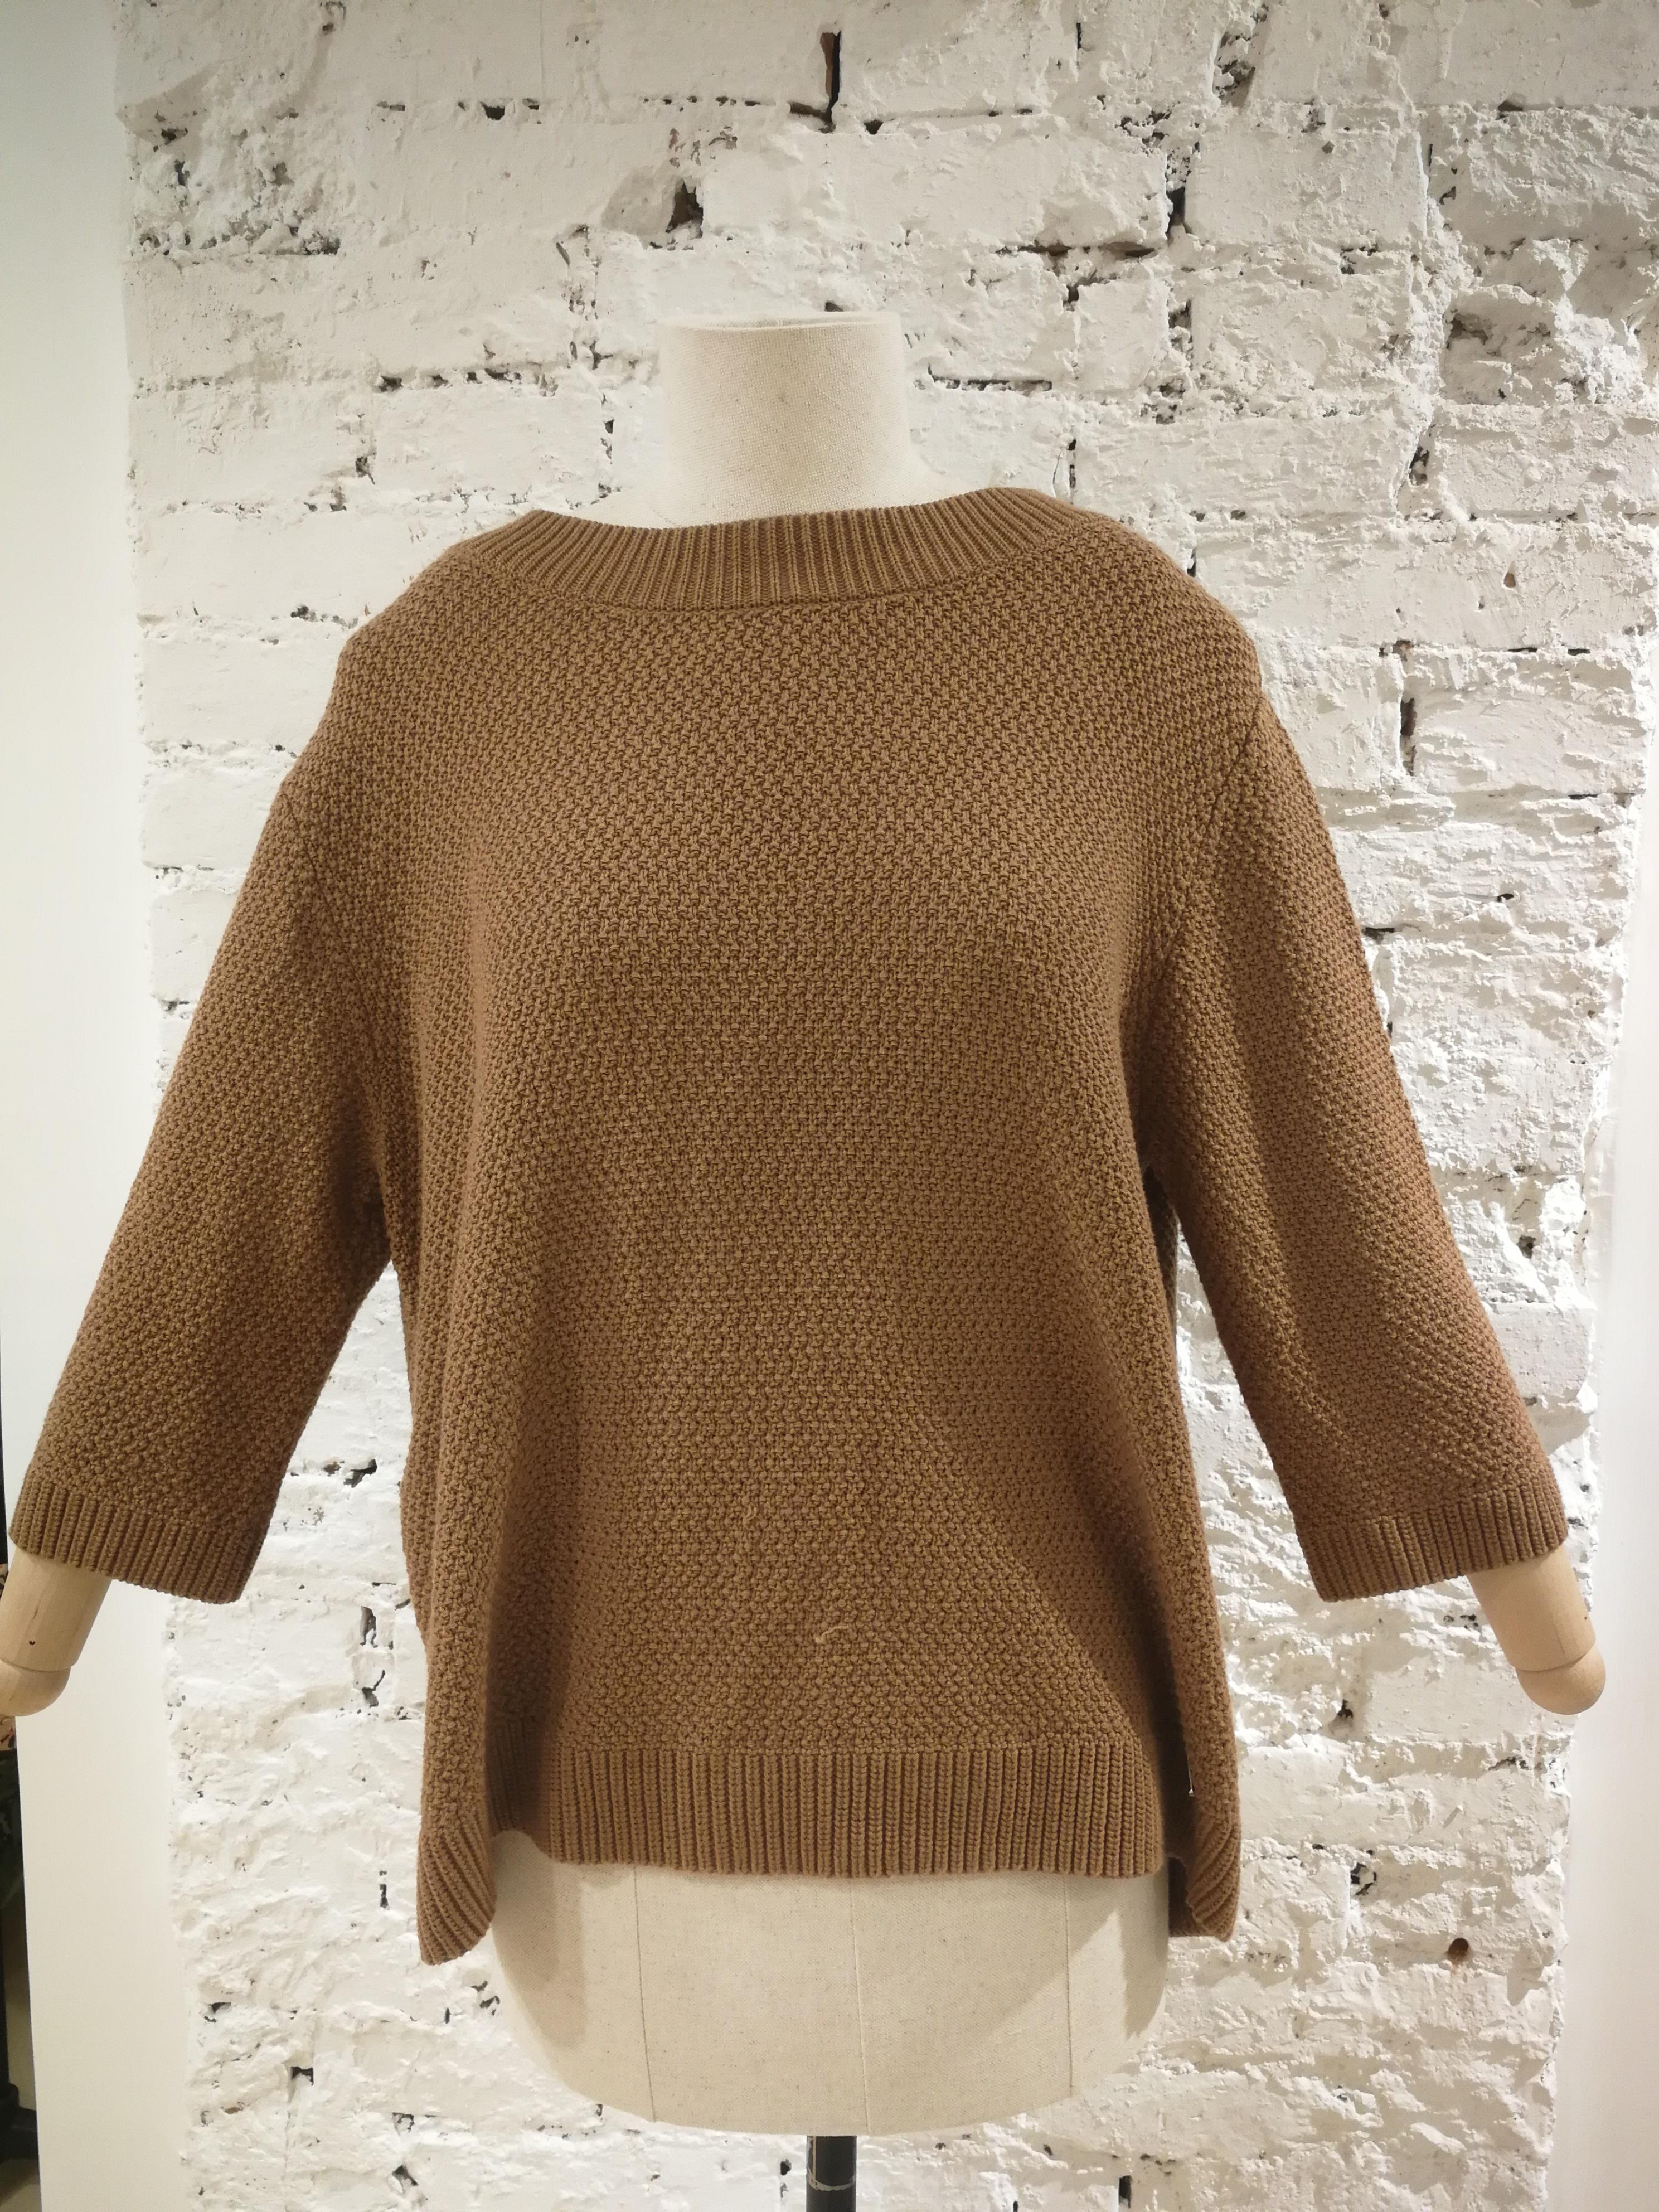 Scee Light Brown Sweater
totally made in italy in size S
embellished with black box on the back
